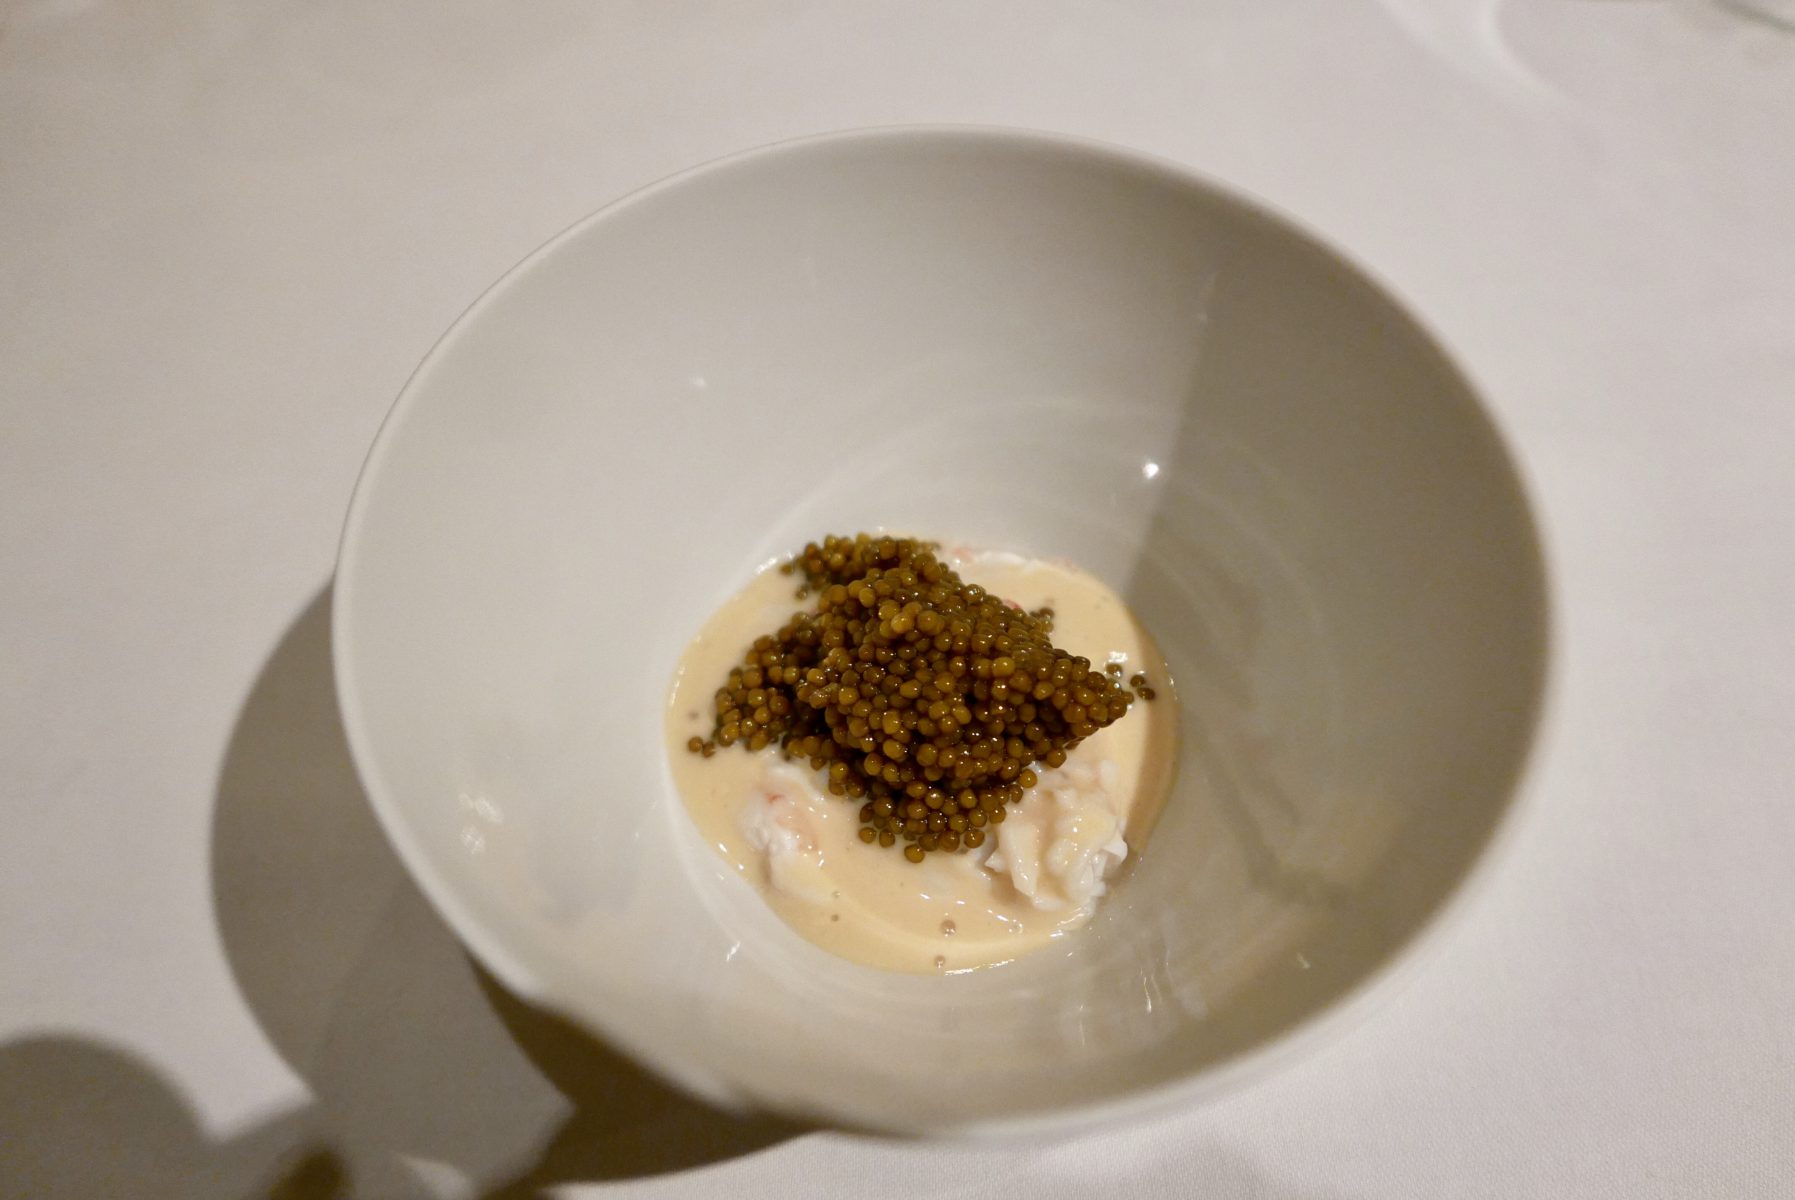 Norwegian crab, sunchoke purée,white wine sauce and caviar at The Chef's table at Brooklyn Fare(3*),New York